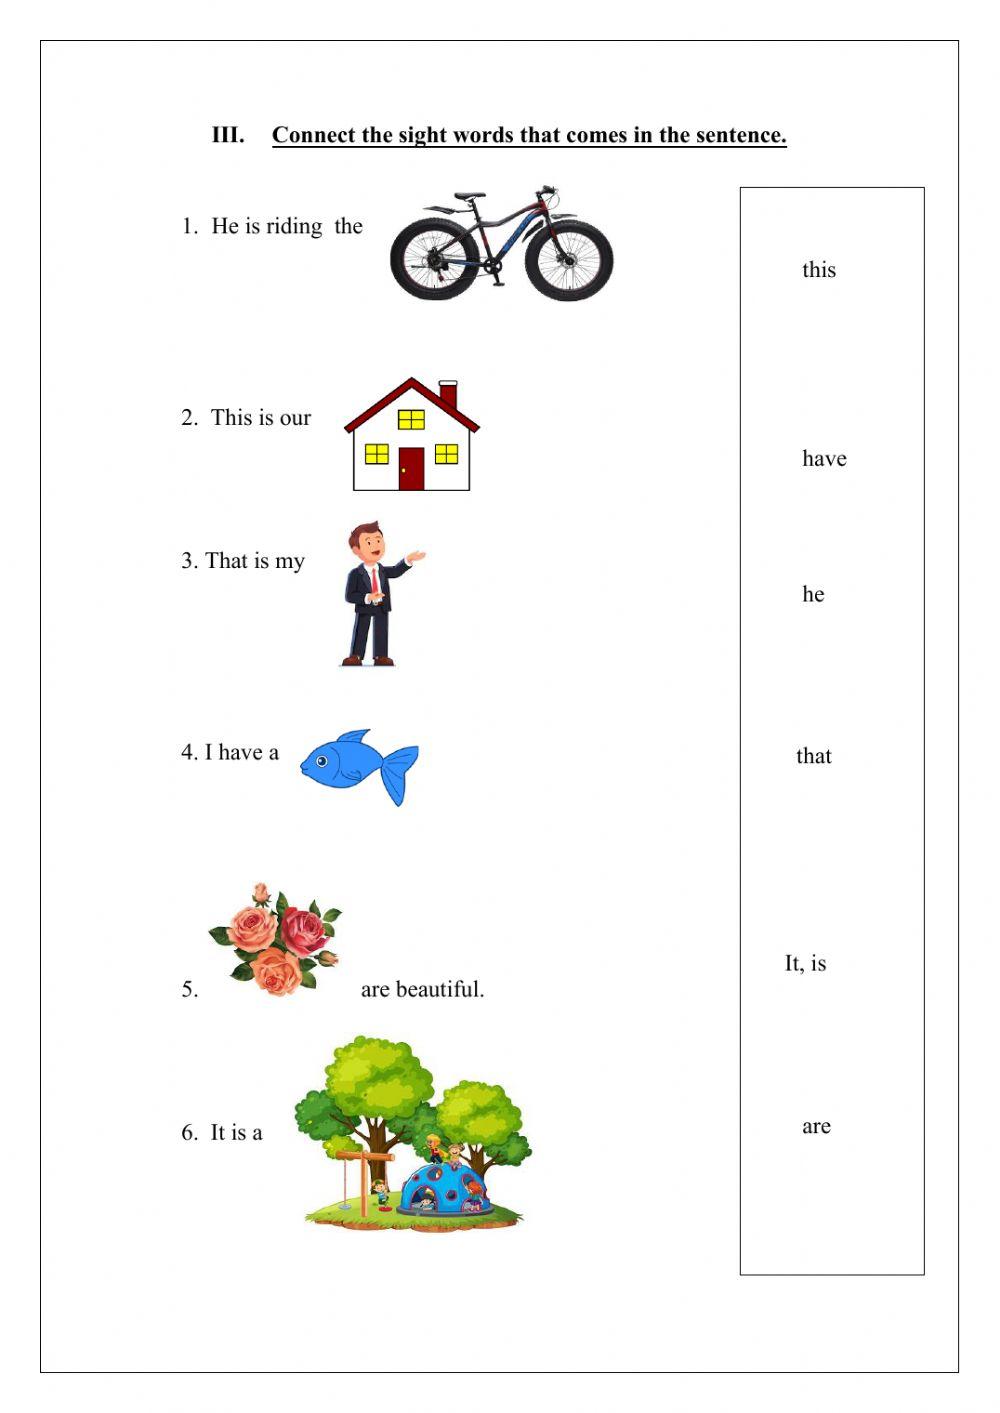 Vowels and sight words